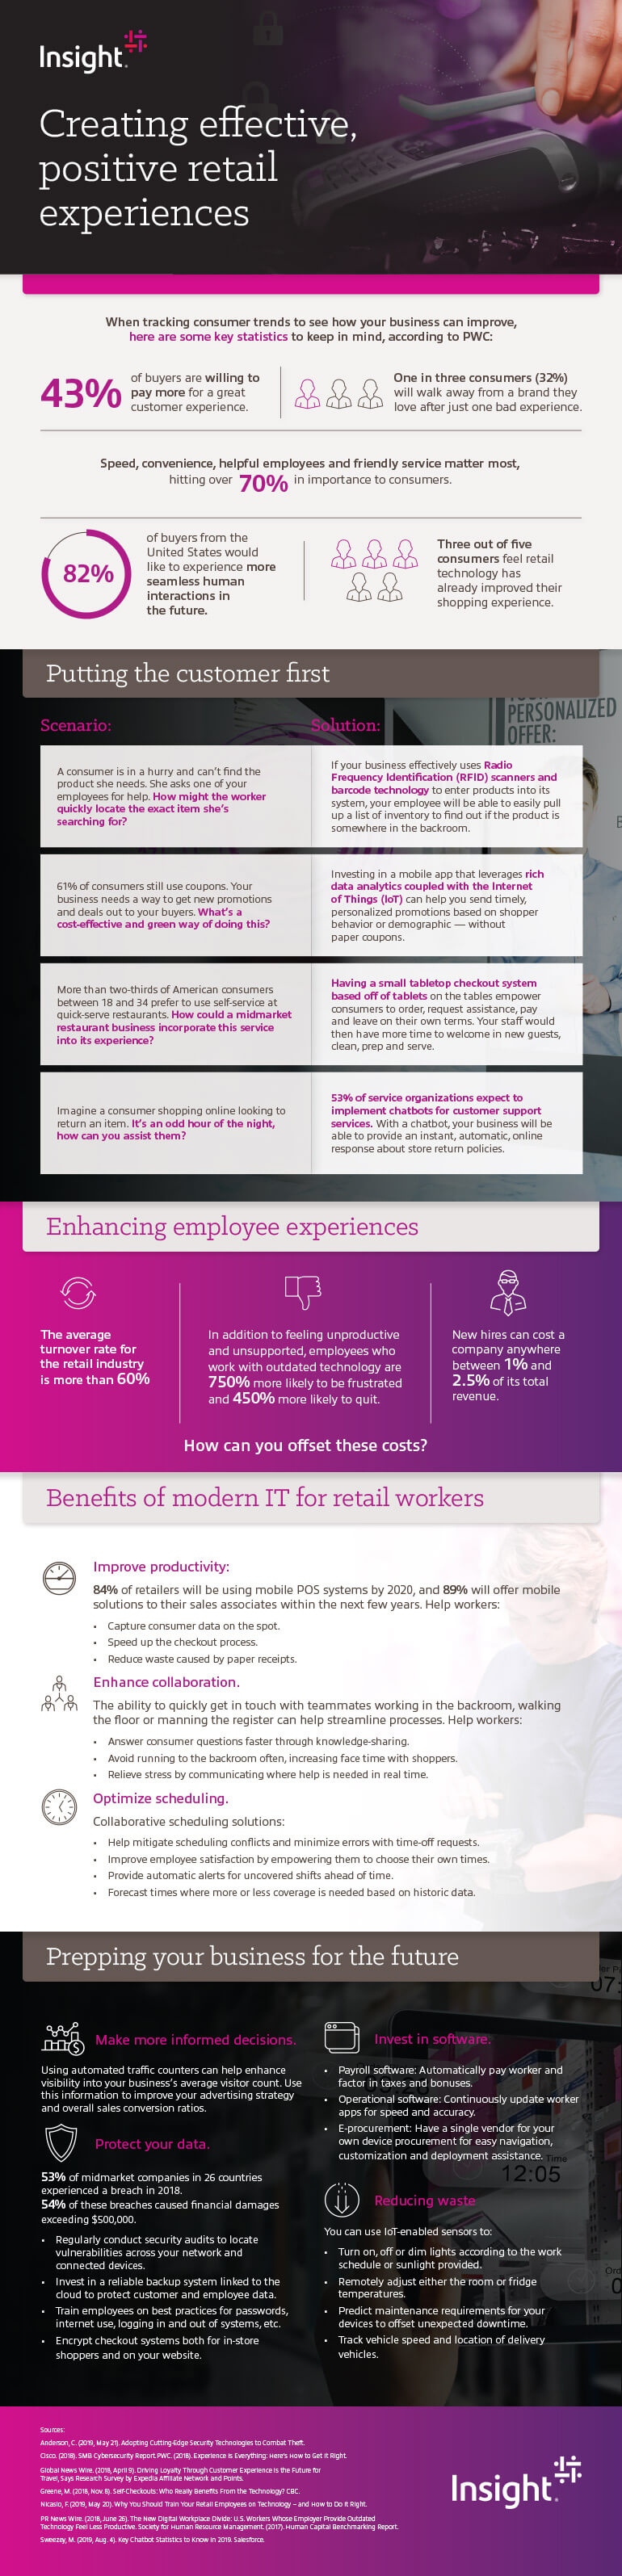 Positive retail experiences infographic as transcribed below